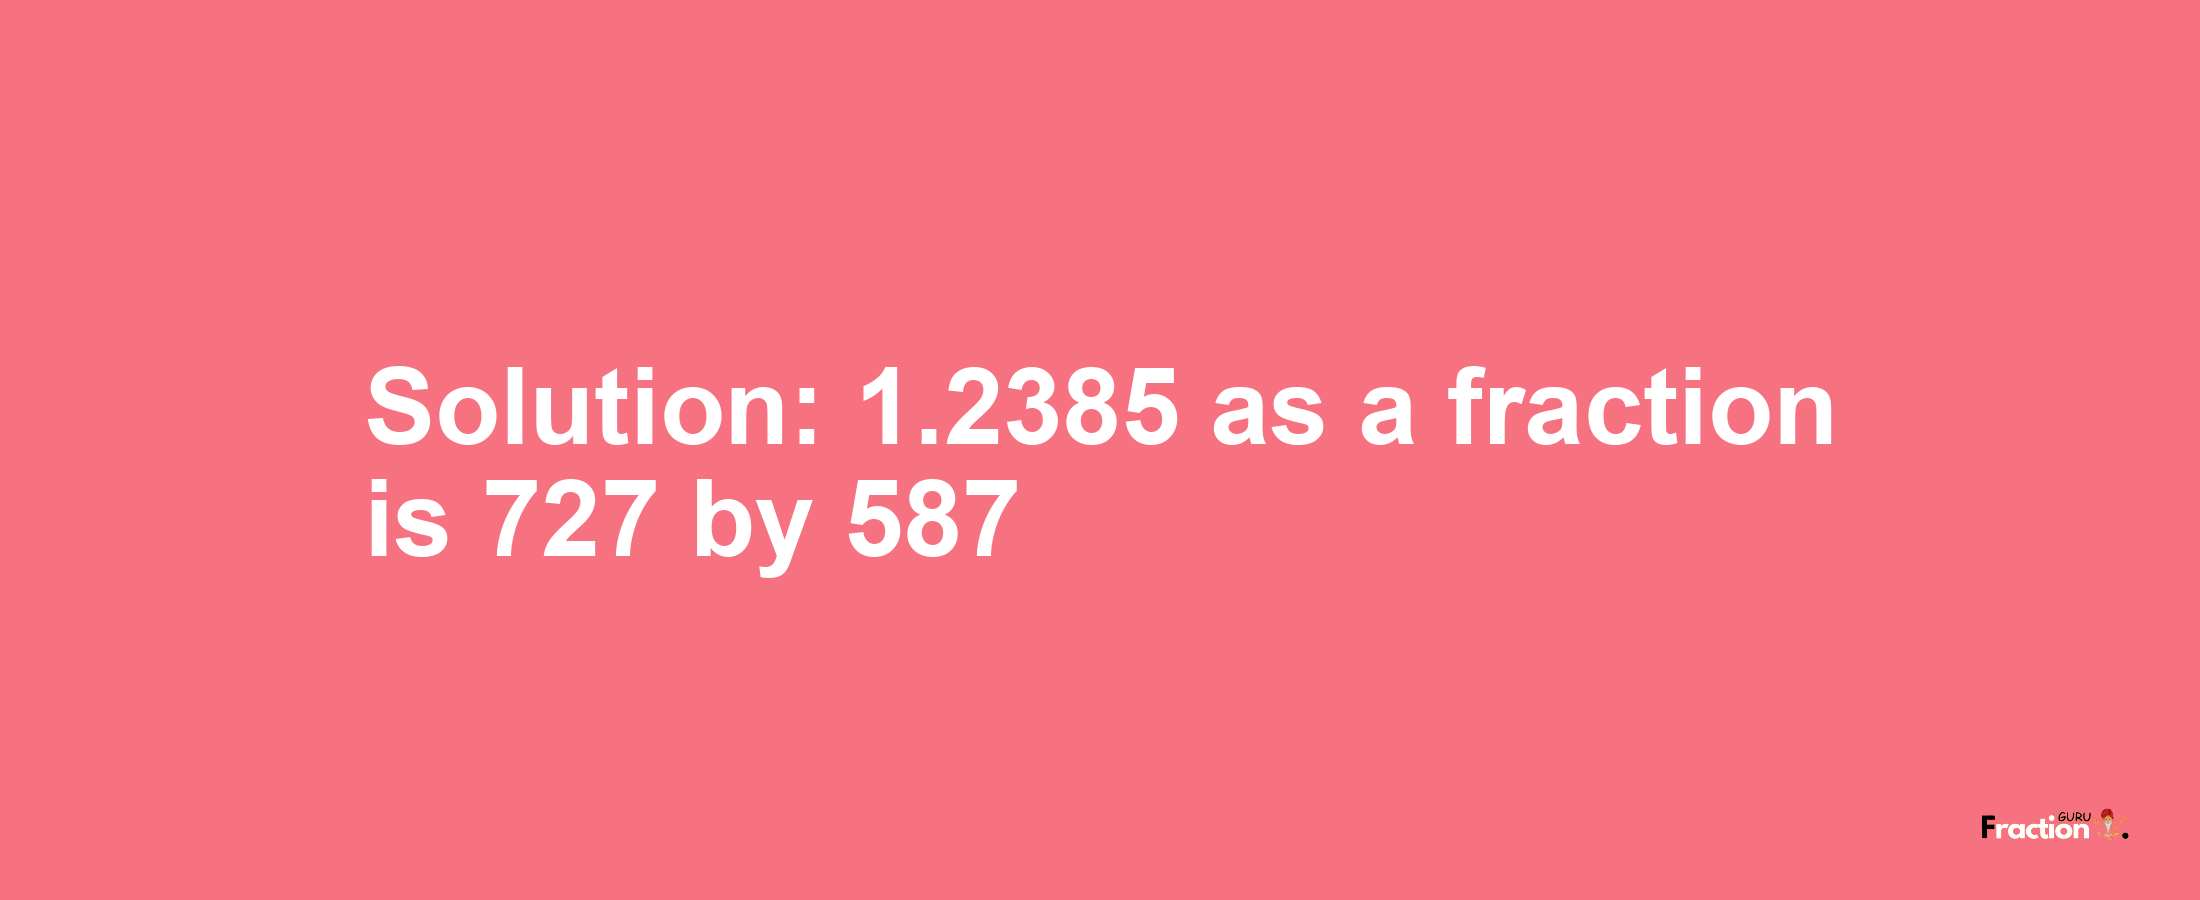 Solution:1.2385 as a fraction is 727/587